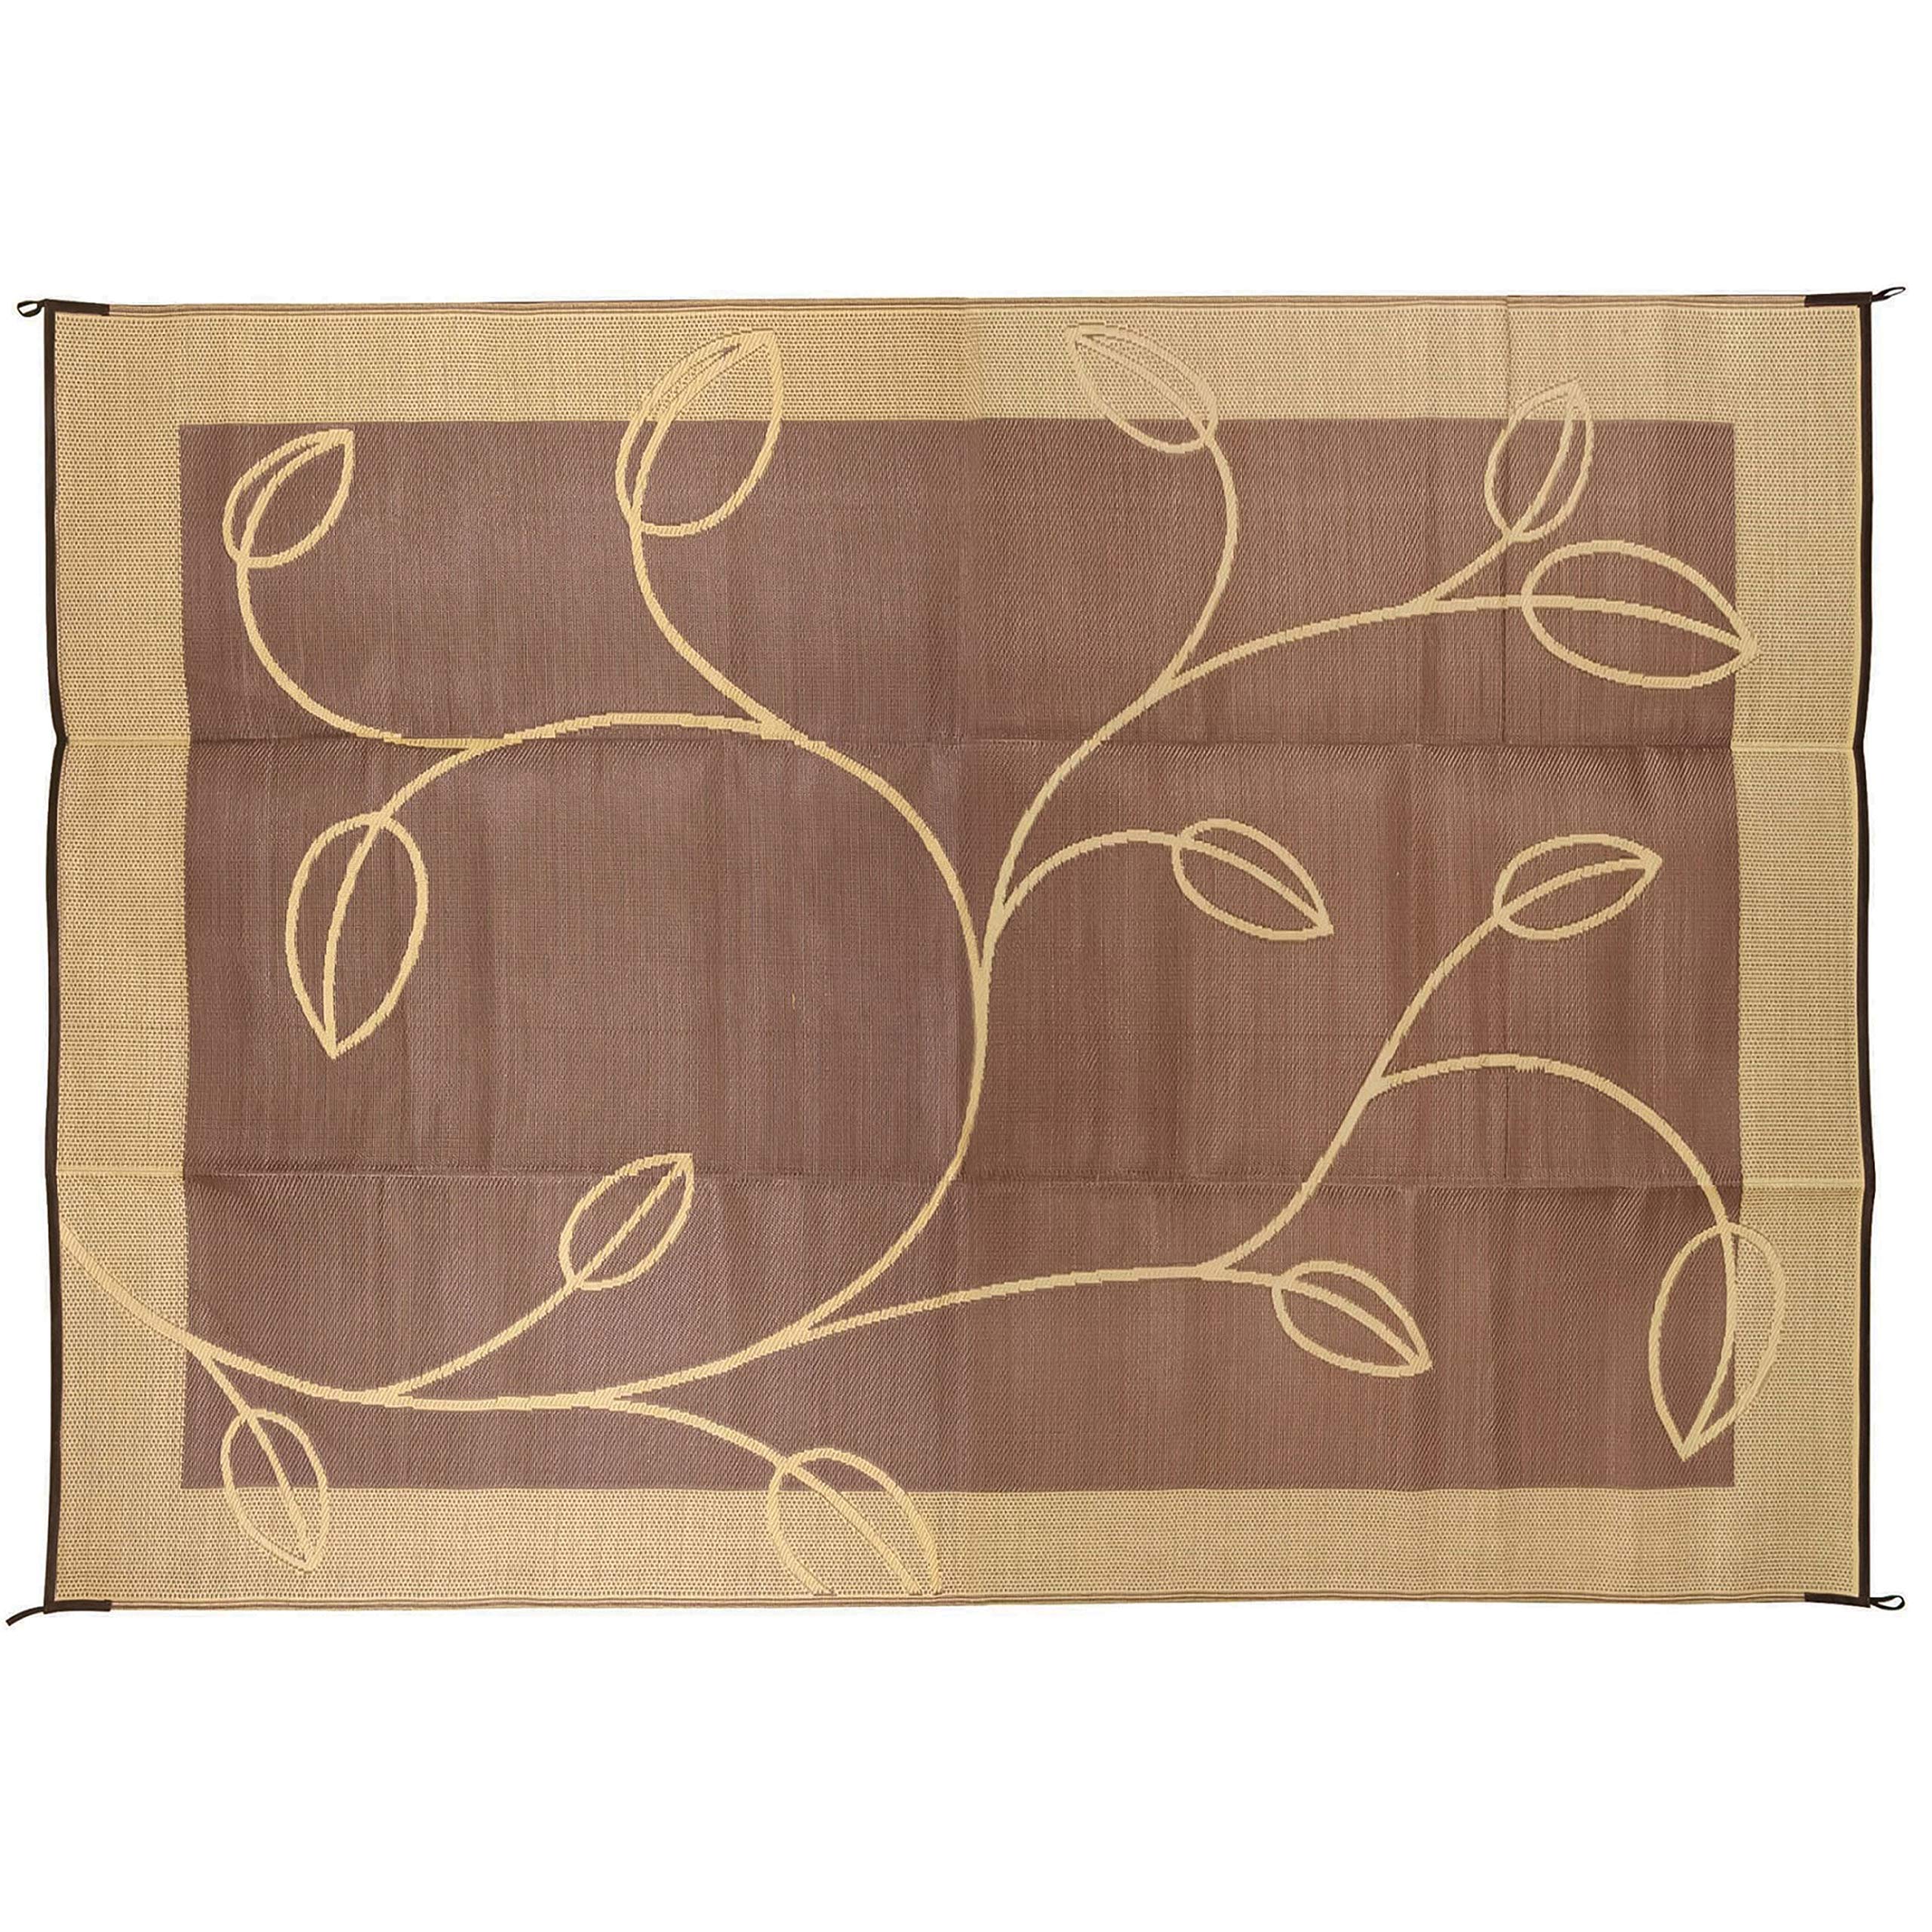 Camco 42855 Outdoor Mat - 9' x 12' Leaf, Brown/Tan (E/F)